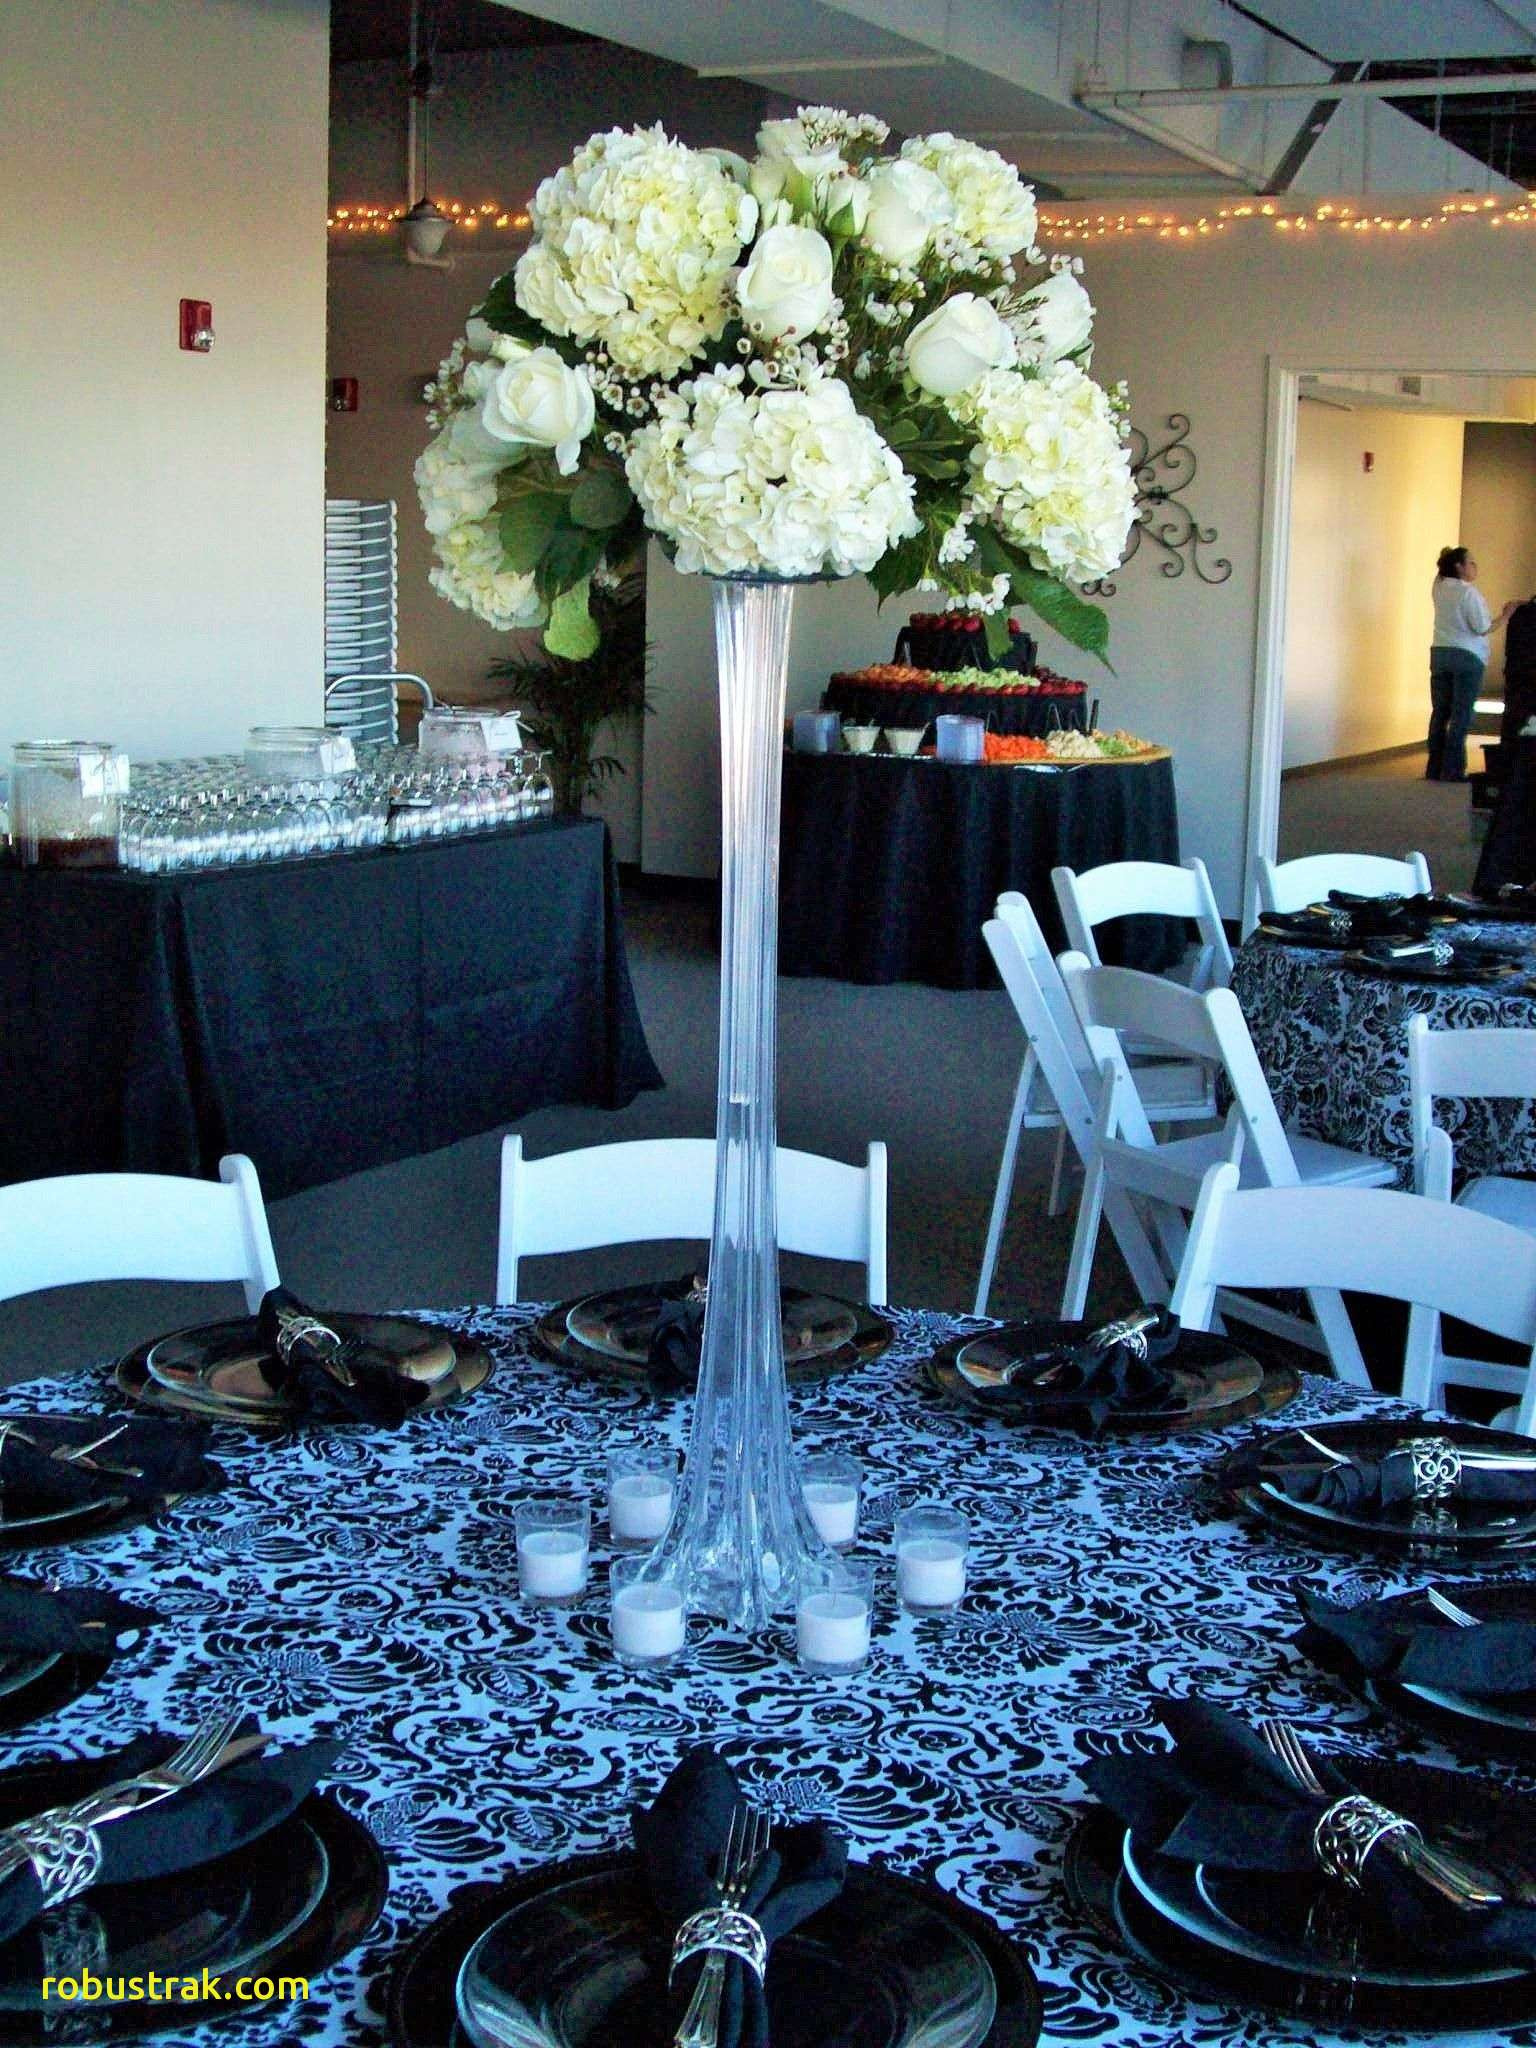 28 Lovely Extra Tall Glass Vases 2024 free download extra tall glass vases of best of tall glass table decorations home design ideas with regard to tall glass vase wedding centerpiece with white hydrangeas surrounded by candles